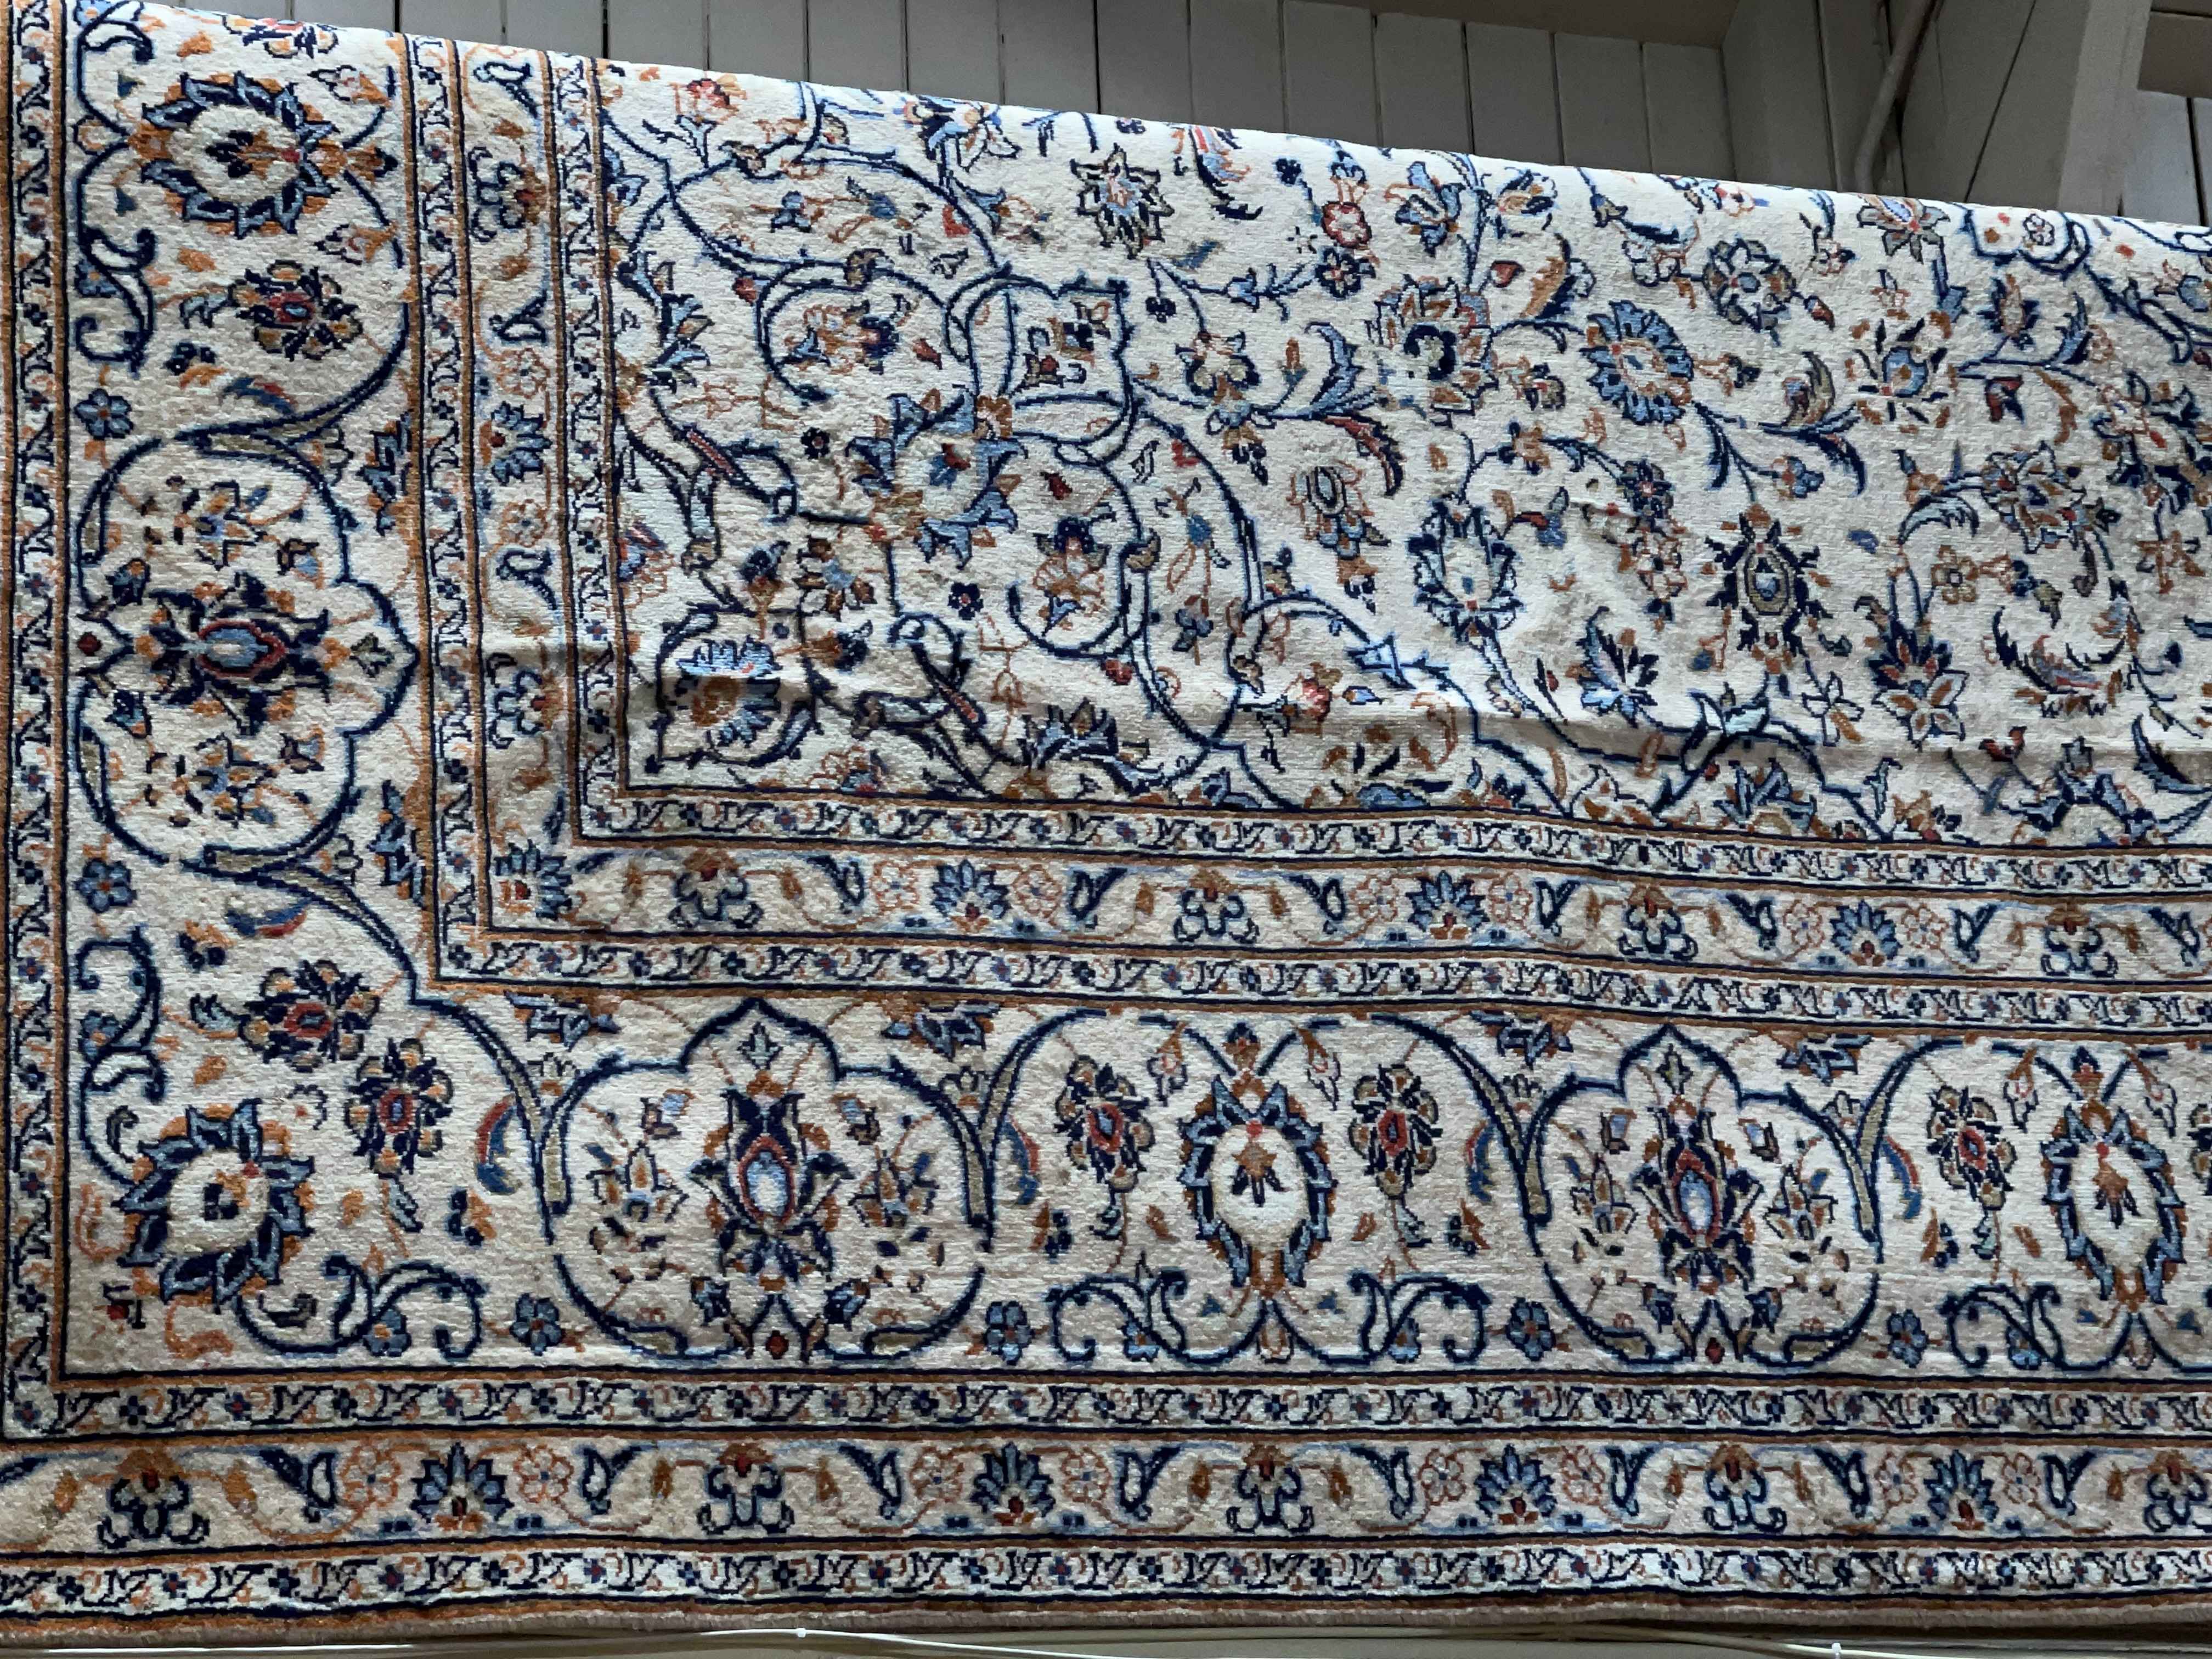 Mid 20th Century hand knotted Persian Kashan carpet 3.85 by 2.85. - Image 2 of 2